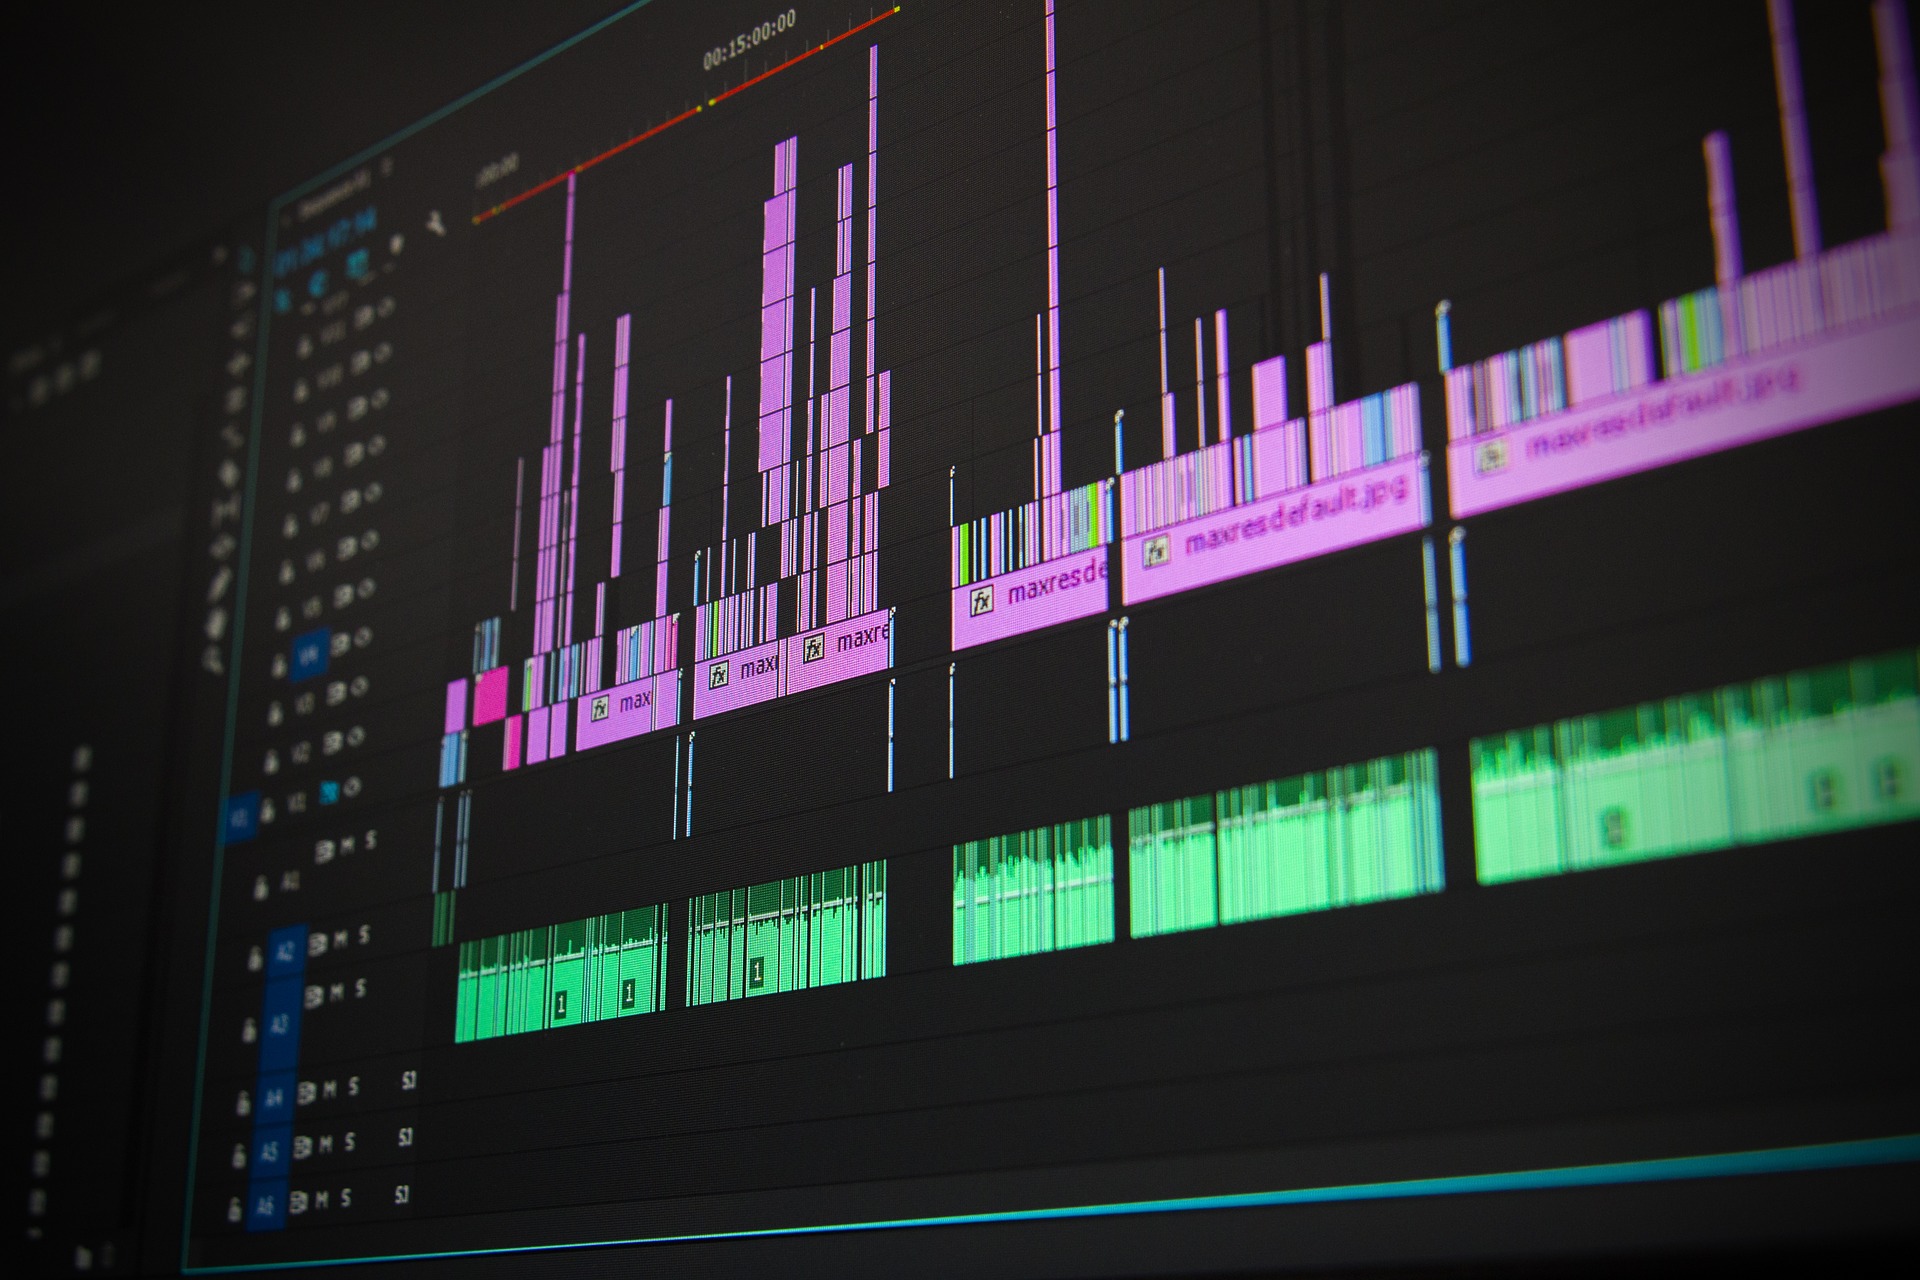 MY TOP SOFTWARE PICKS FOR VIDEO EDITING